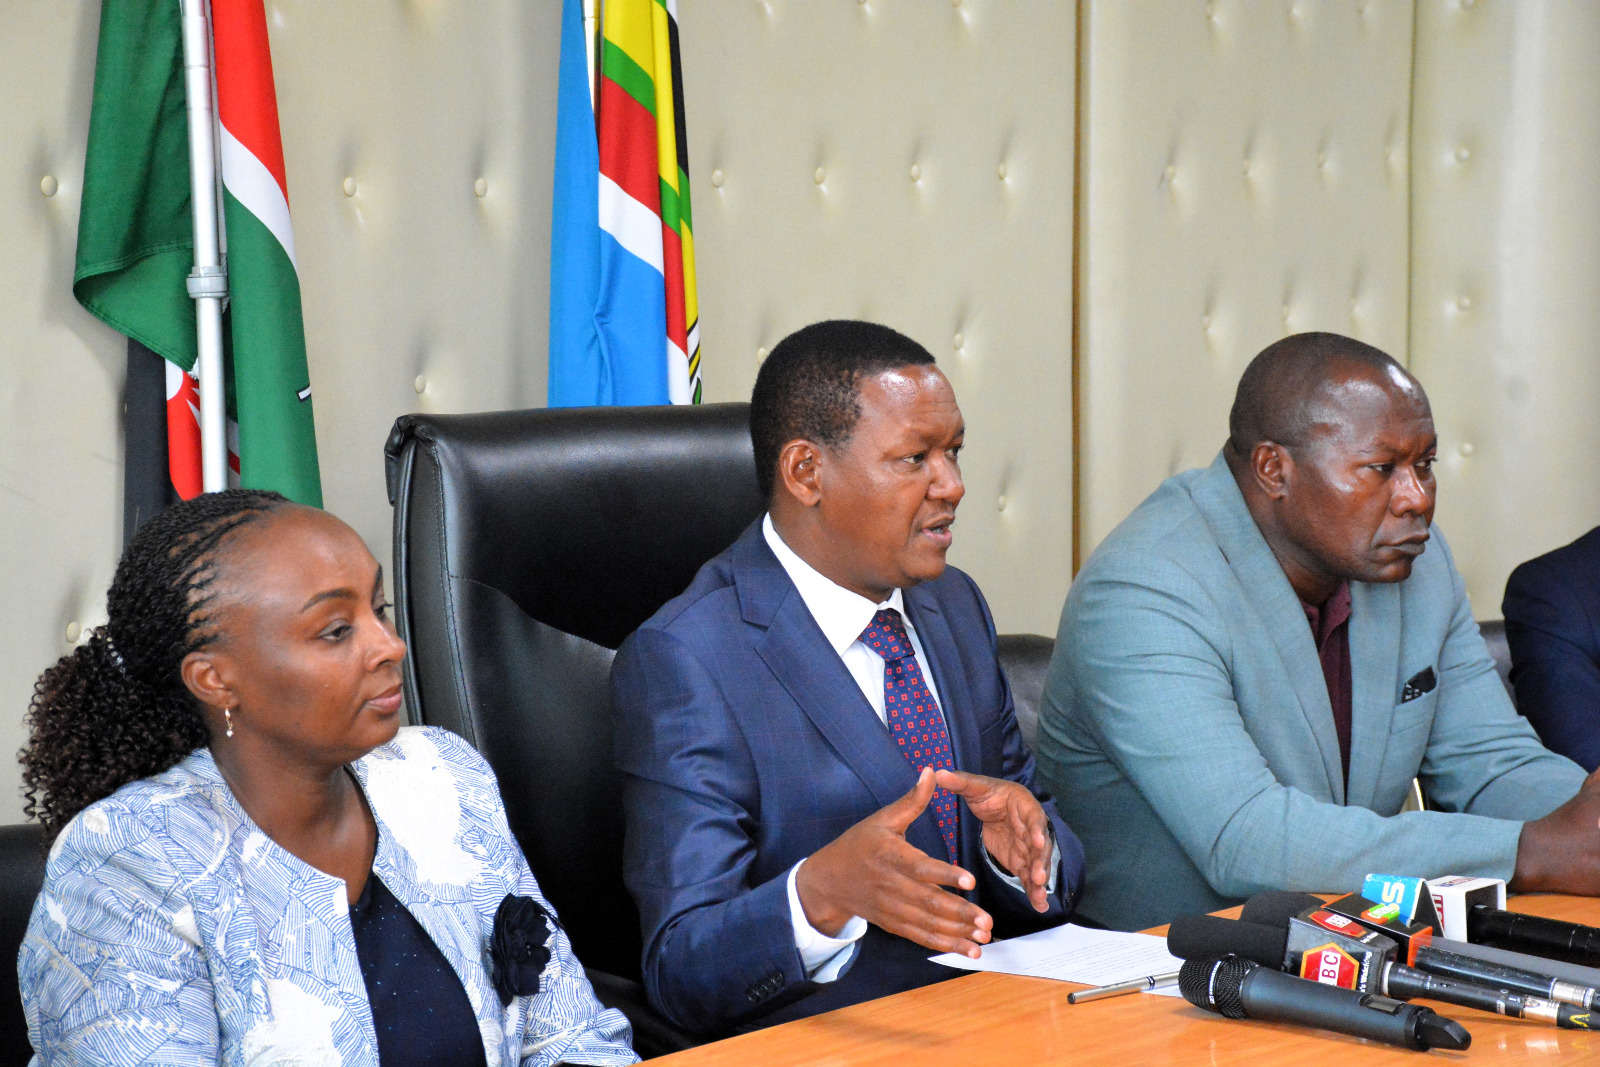 Tourism and wildlife cabinet secretary Dr Alfred Mutua when he addressed the media on the state of tourism in the country. He was accompanied by Mike Macharia CEO Kenya association of hotel keepers, Fred Odek, chairman Kenya tourism federation ( both on the left) and Catherine Murage treasurer KAHC and June Chepkemei CEO kenya tourism board.